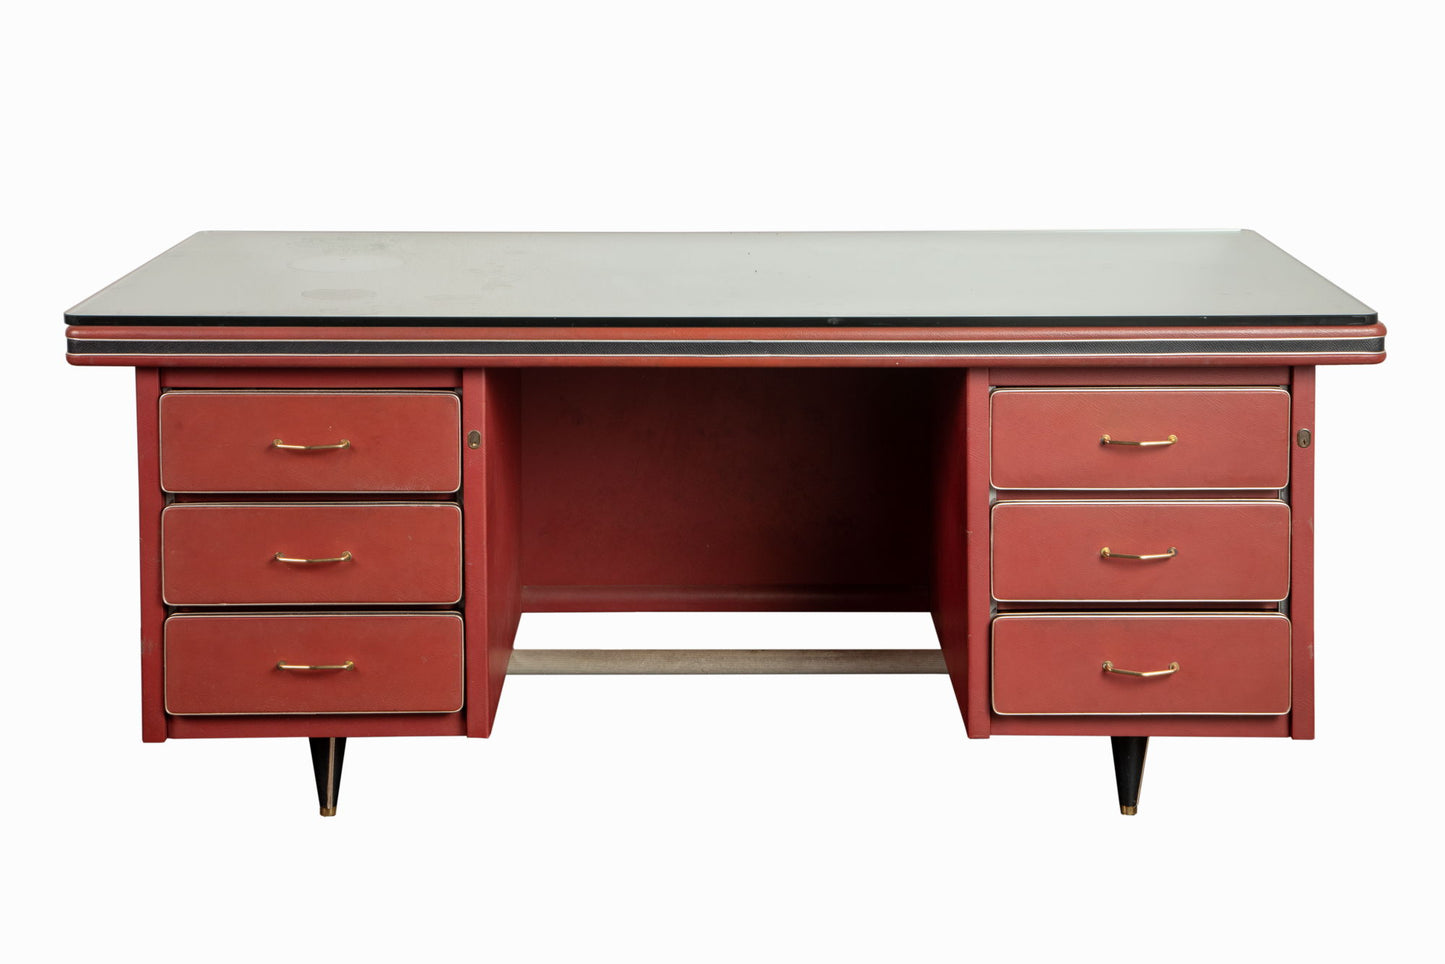 Large Umberto Mascagni desk from the 1950s